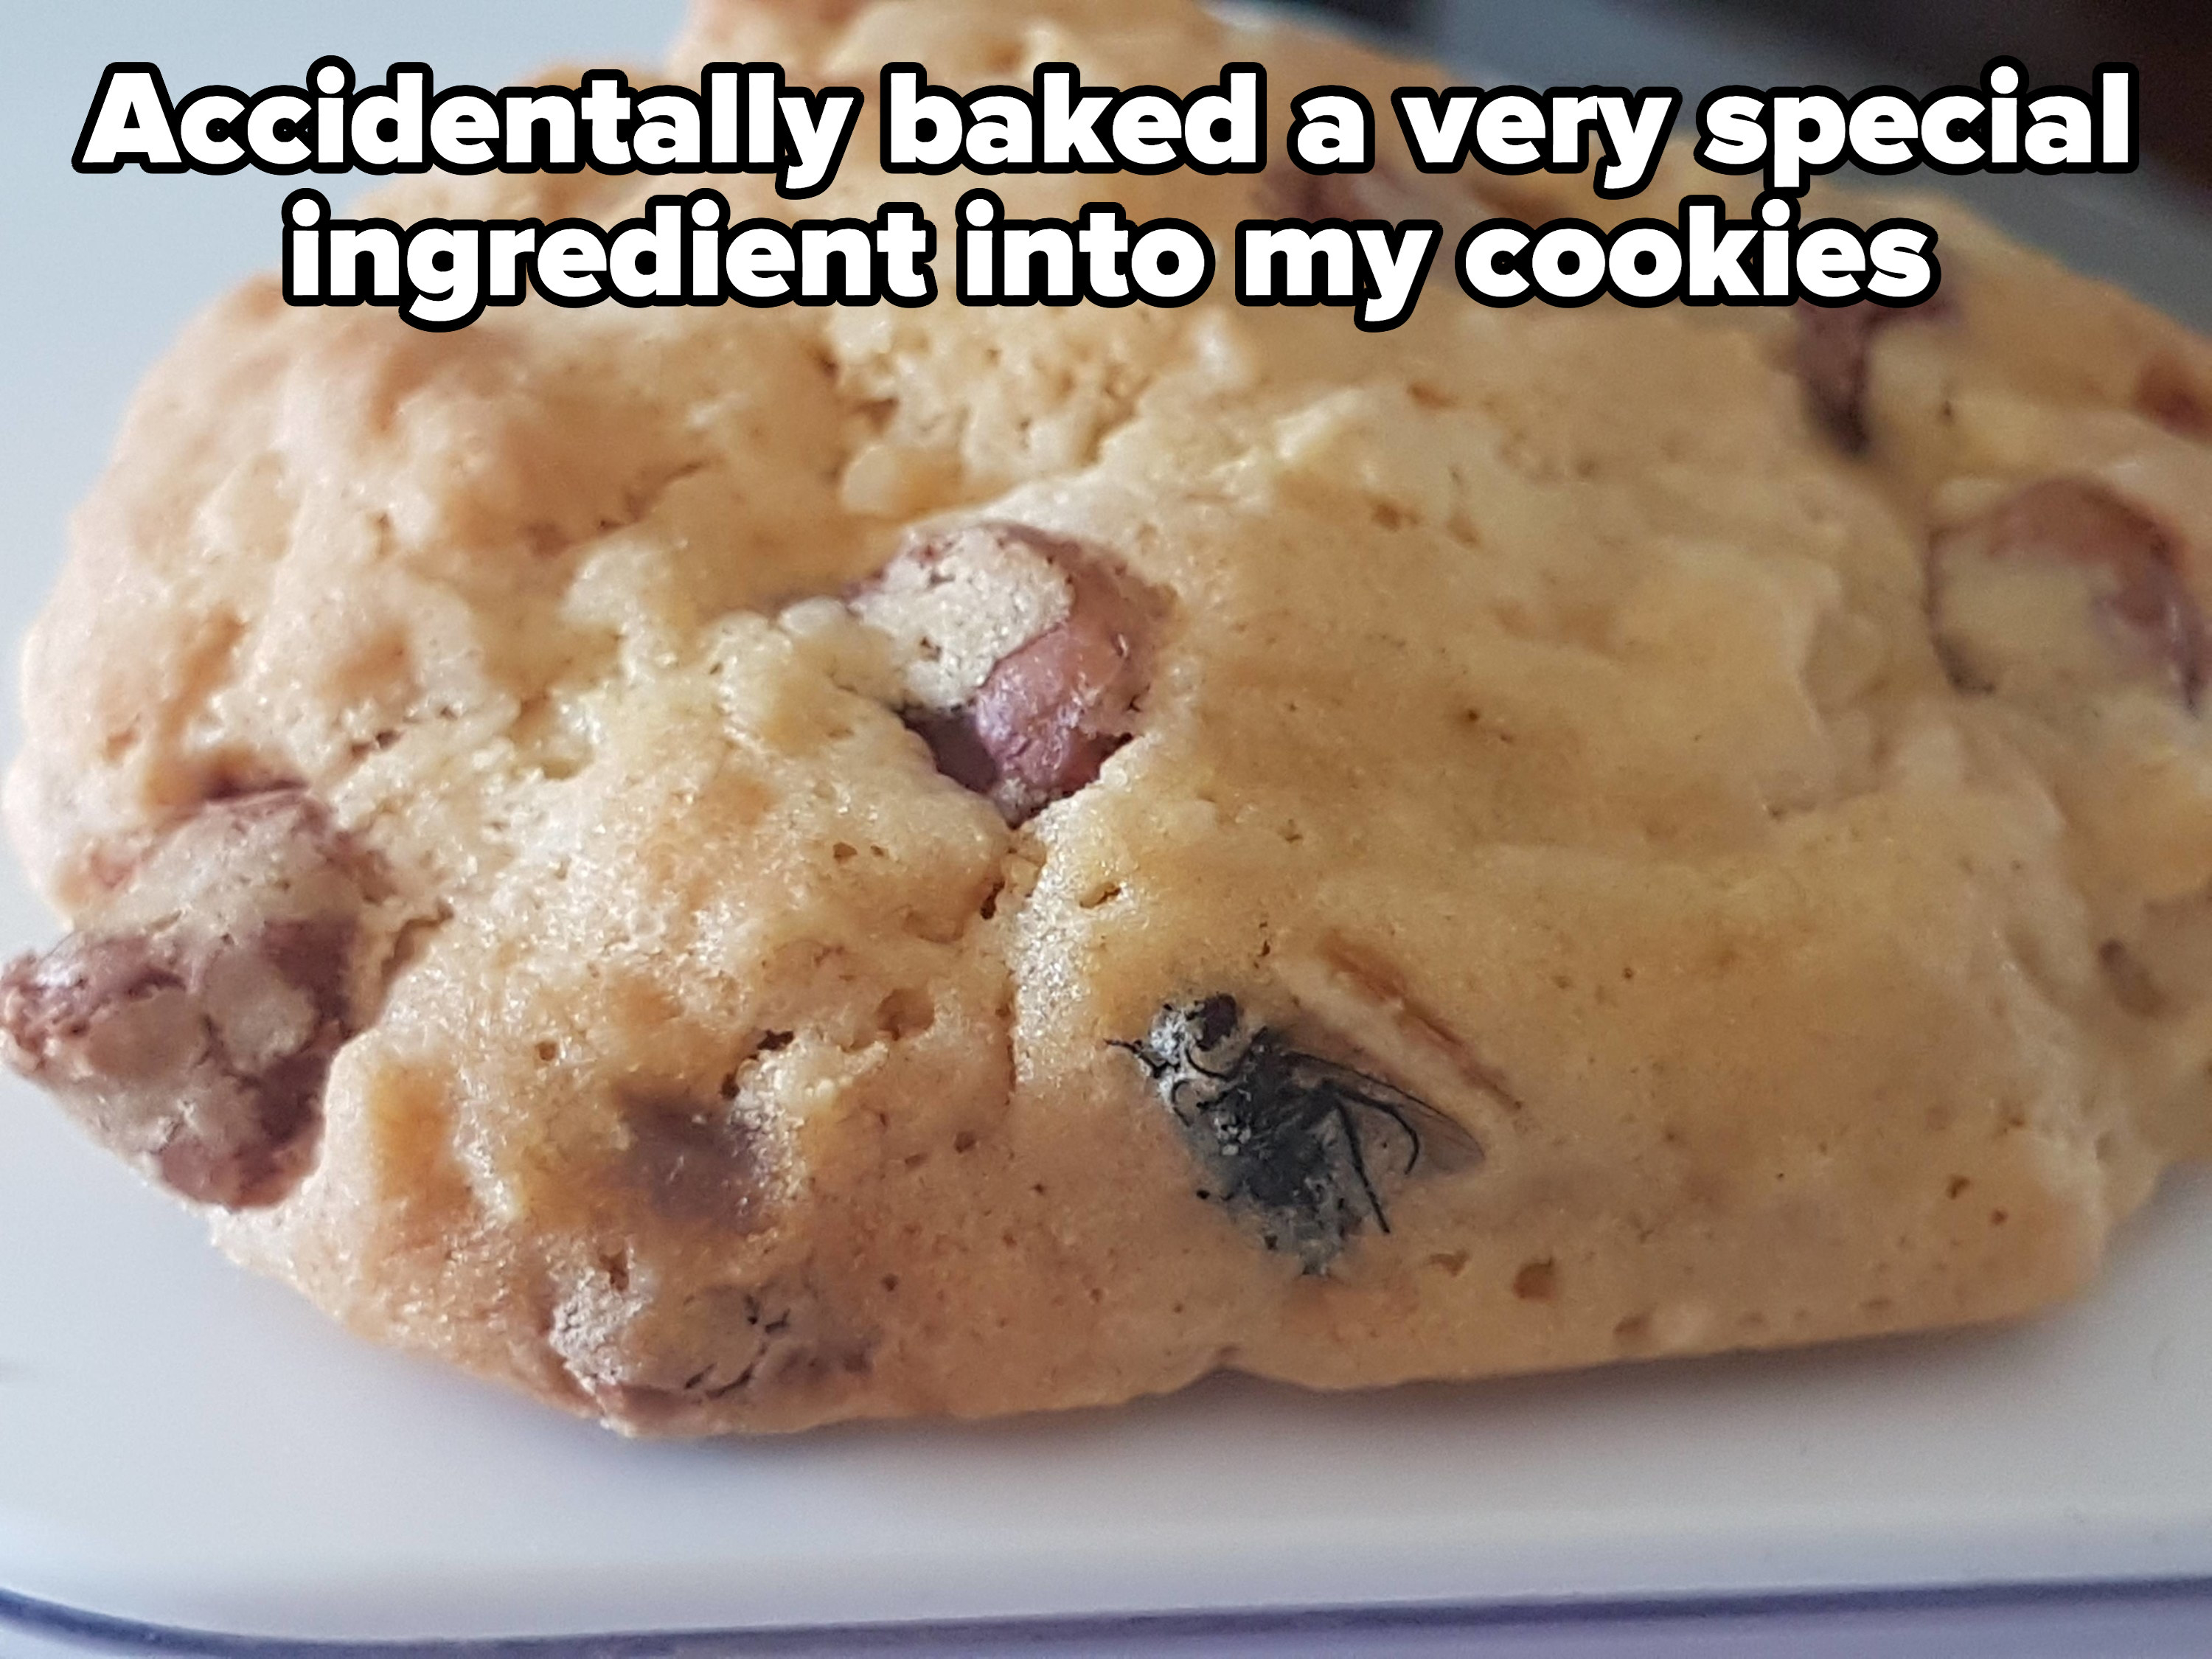 A fly in a cookie